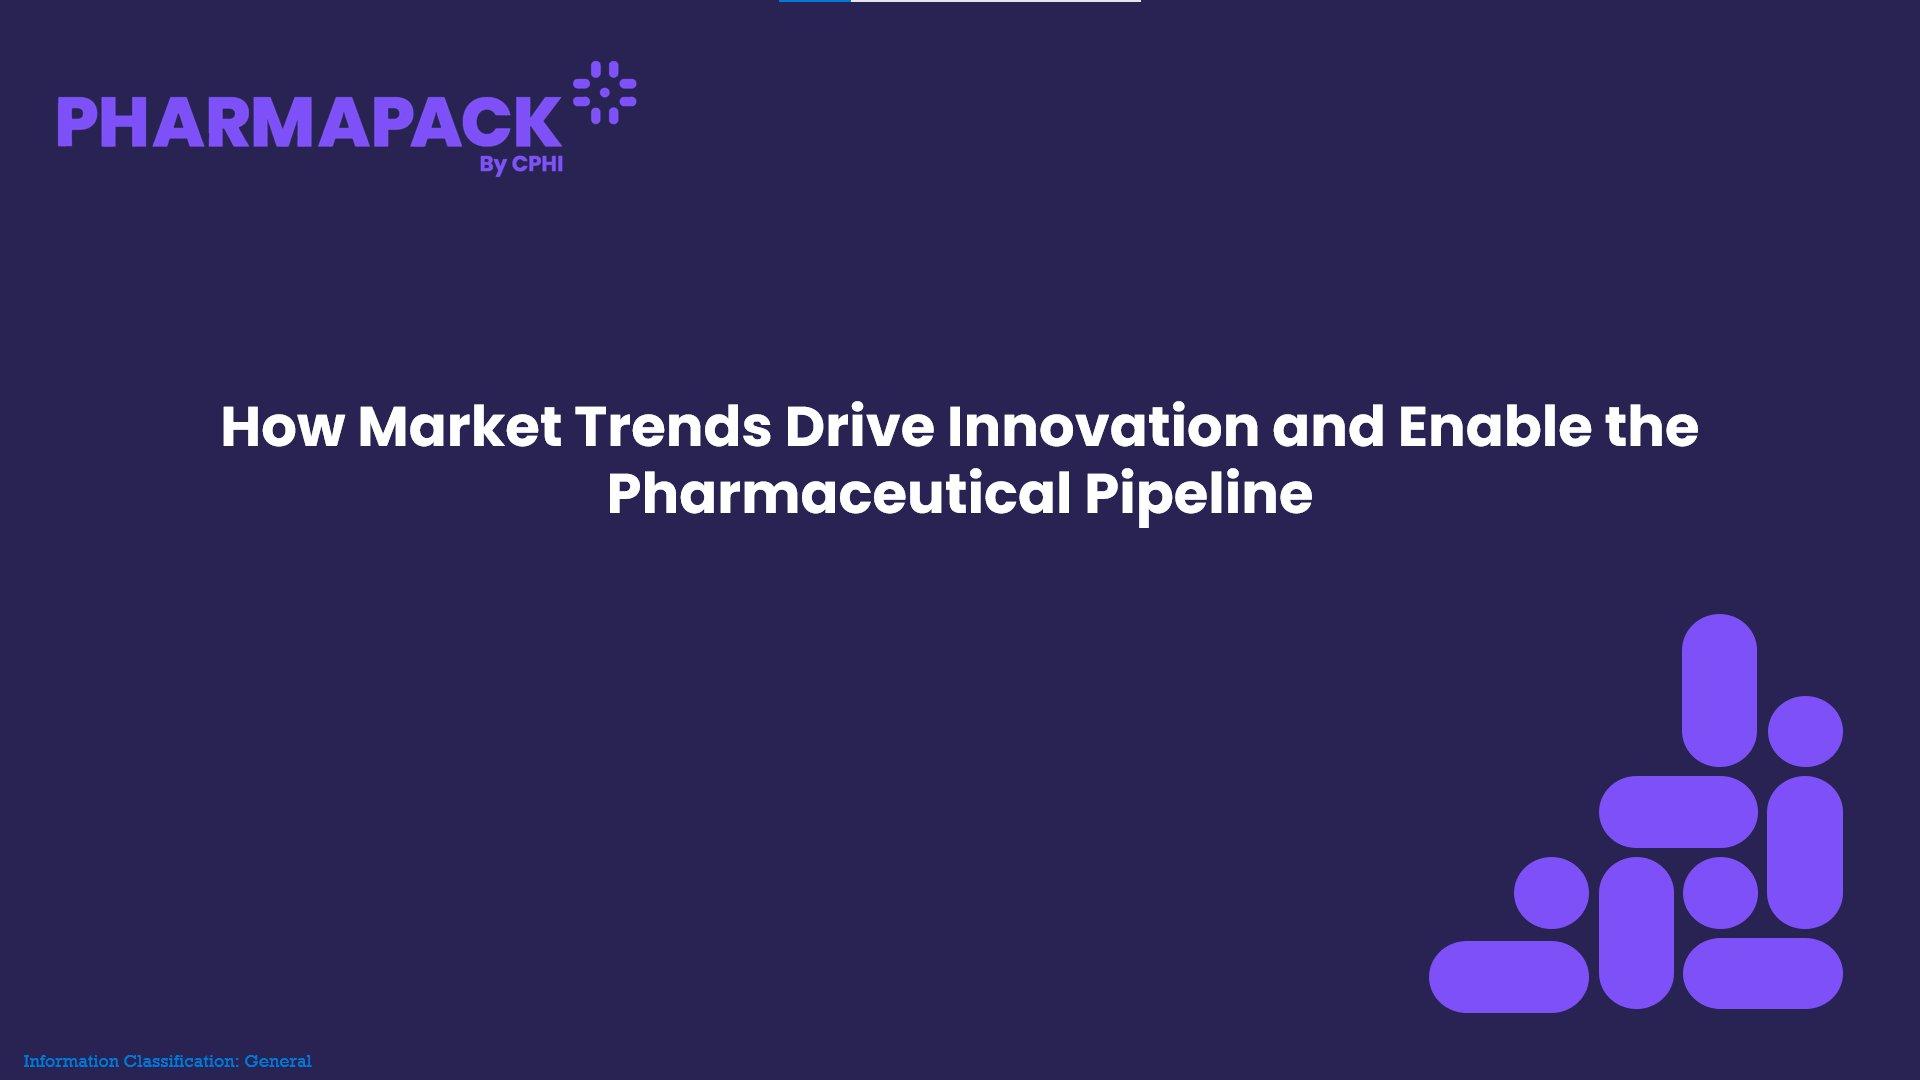 How Market Trends Drive Innovation and Enable the Pharmaceutical Pipeline